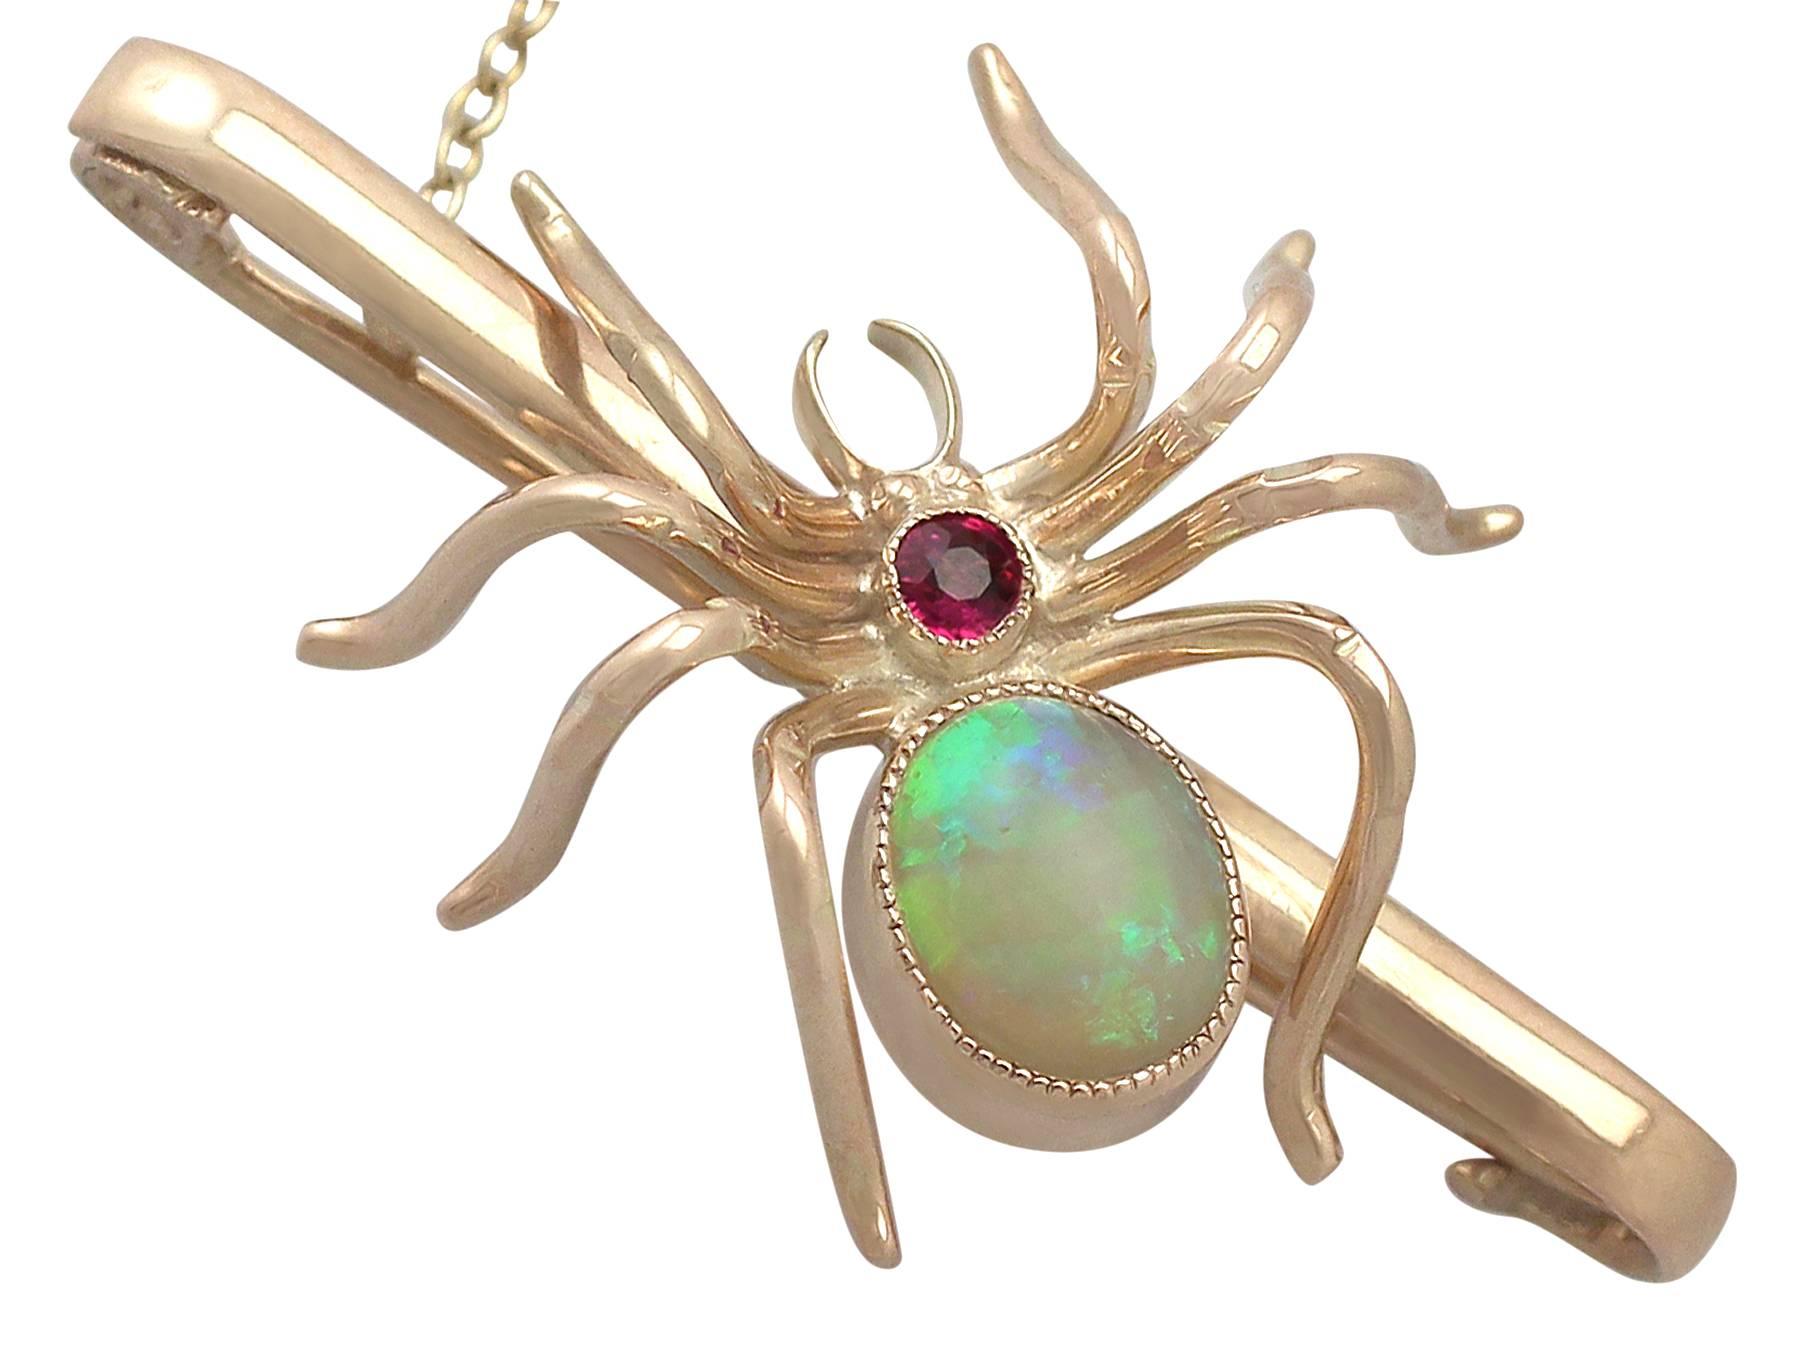 A fine and impressive antique 1.22 carat opal and 0.10 carat natural ruby, 9 karat yellow gold bar brooch in the form of a spider; part of our antique jewelry and estate jewelry collections

This fine and impressive bar brooch has been crafted in